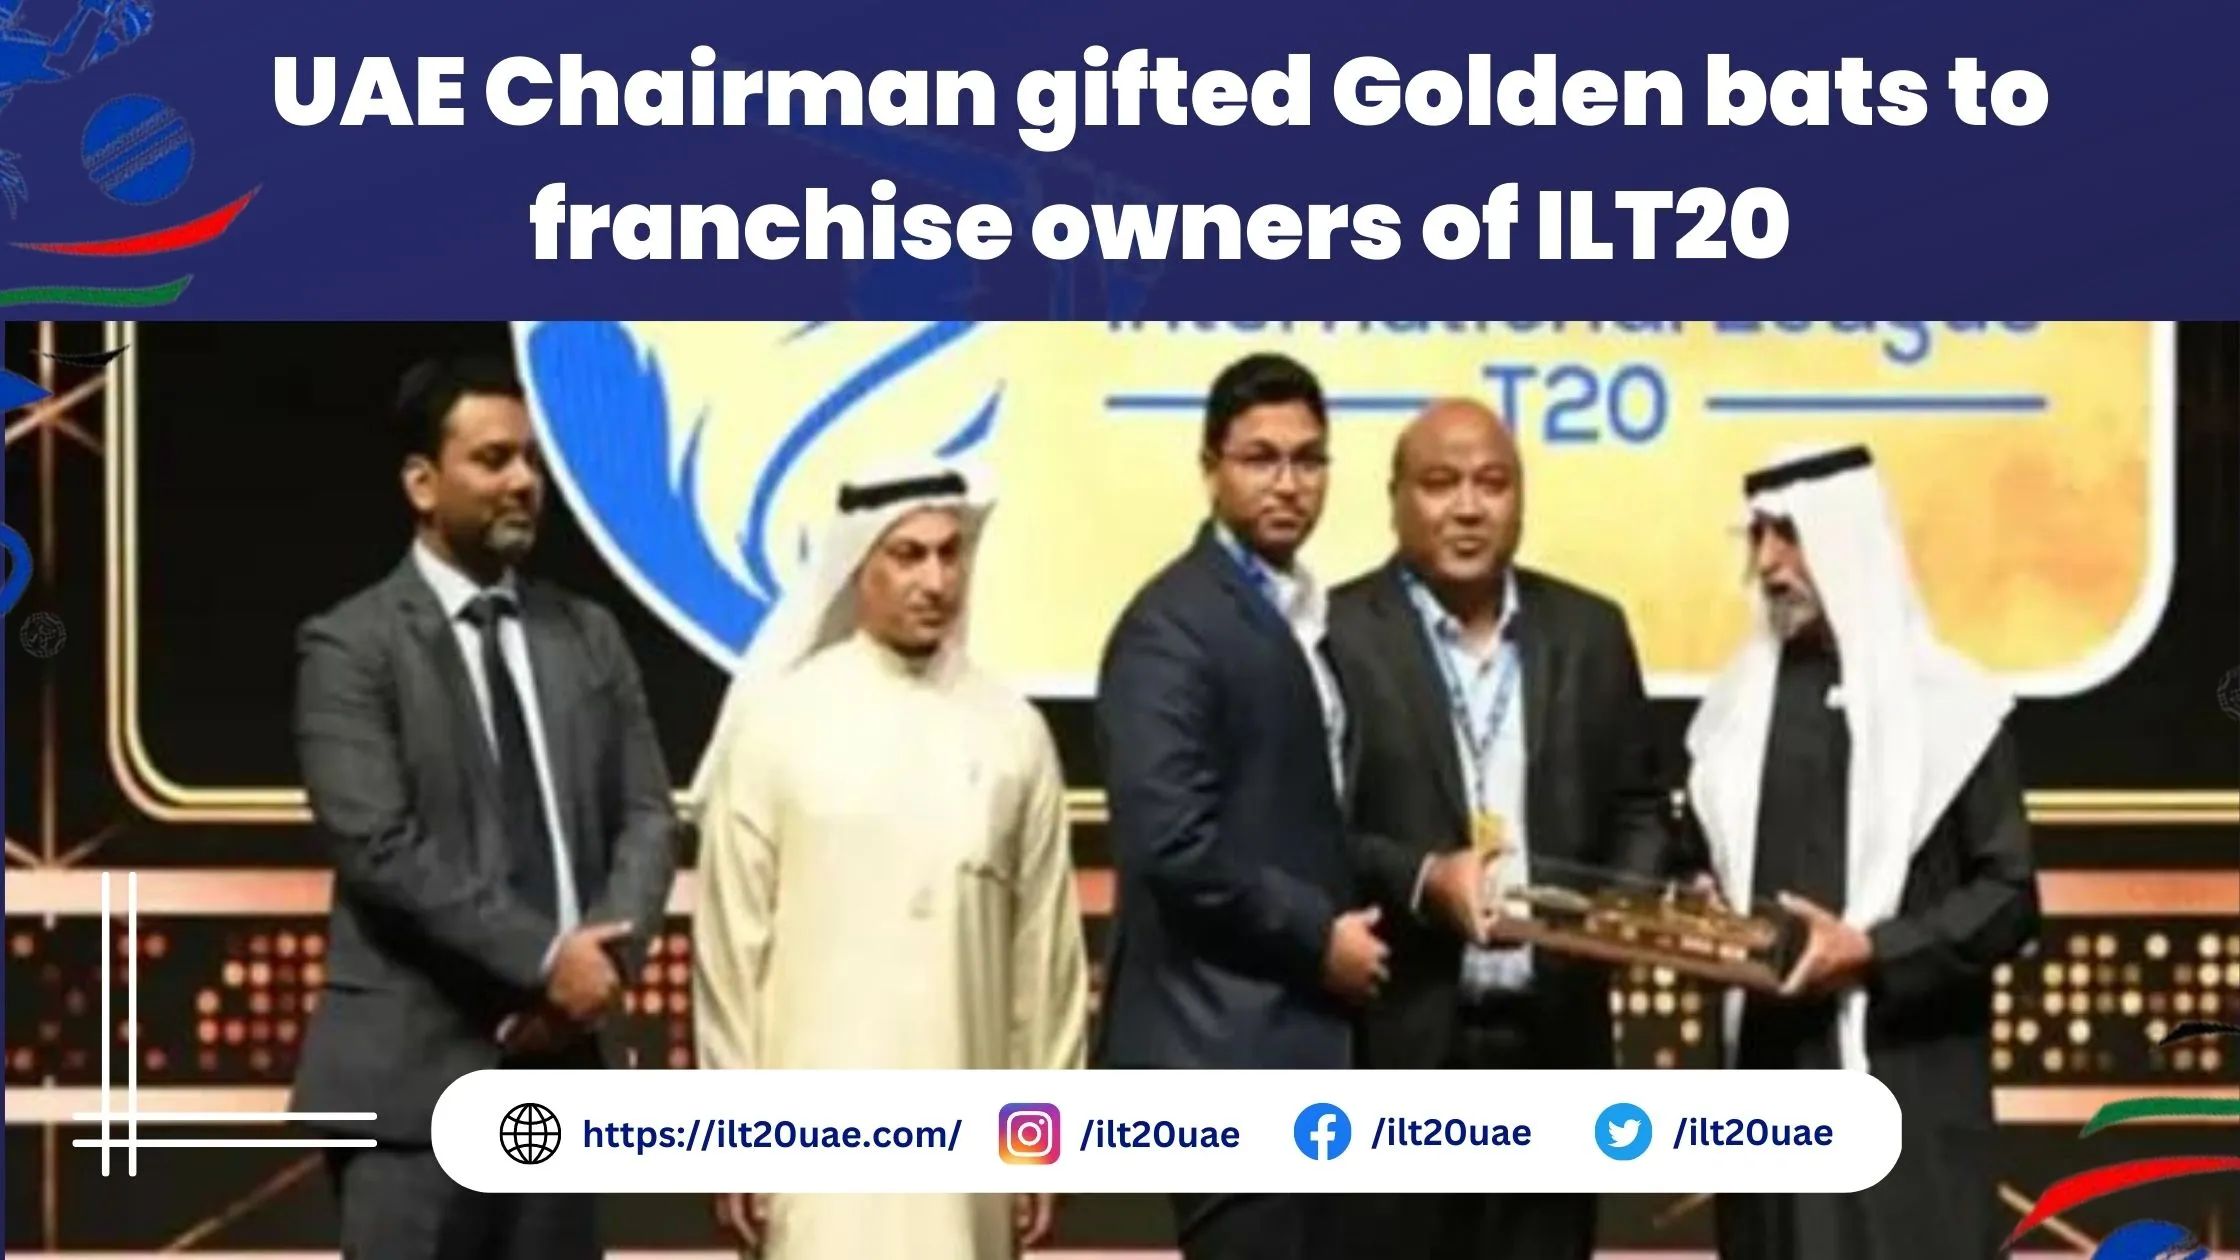 UAE Chairman gifted Golden bats to franchise owners of ILT20